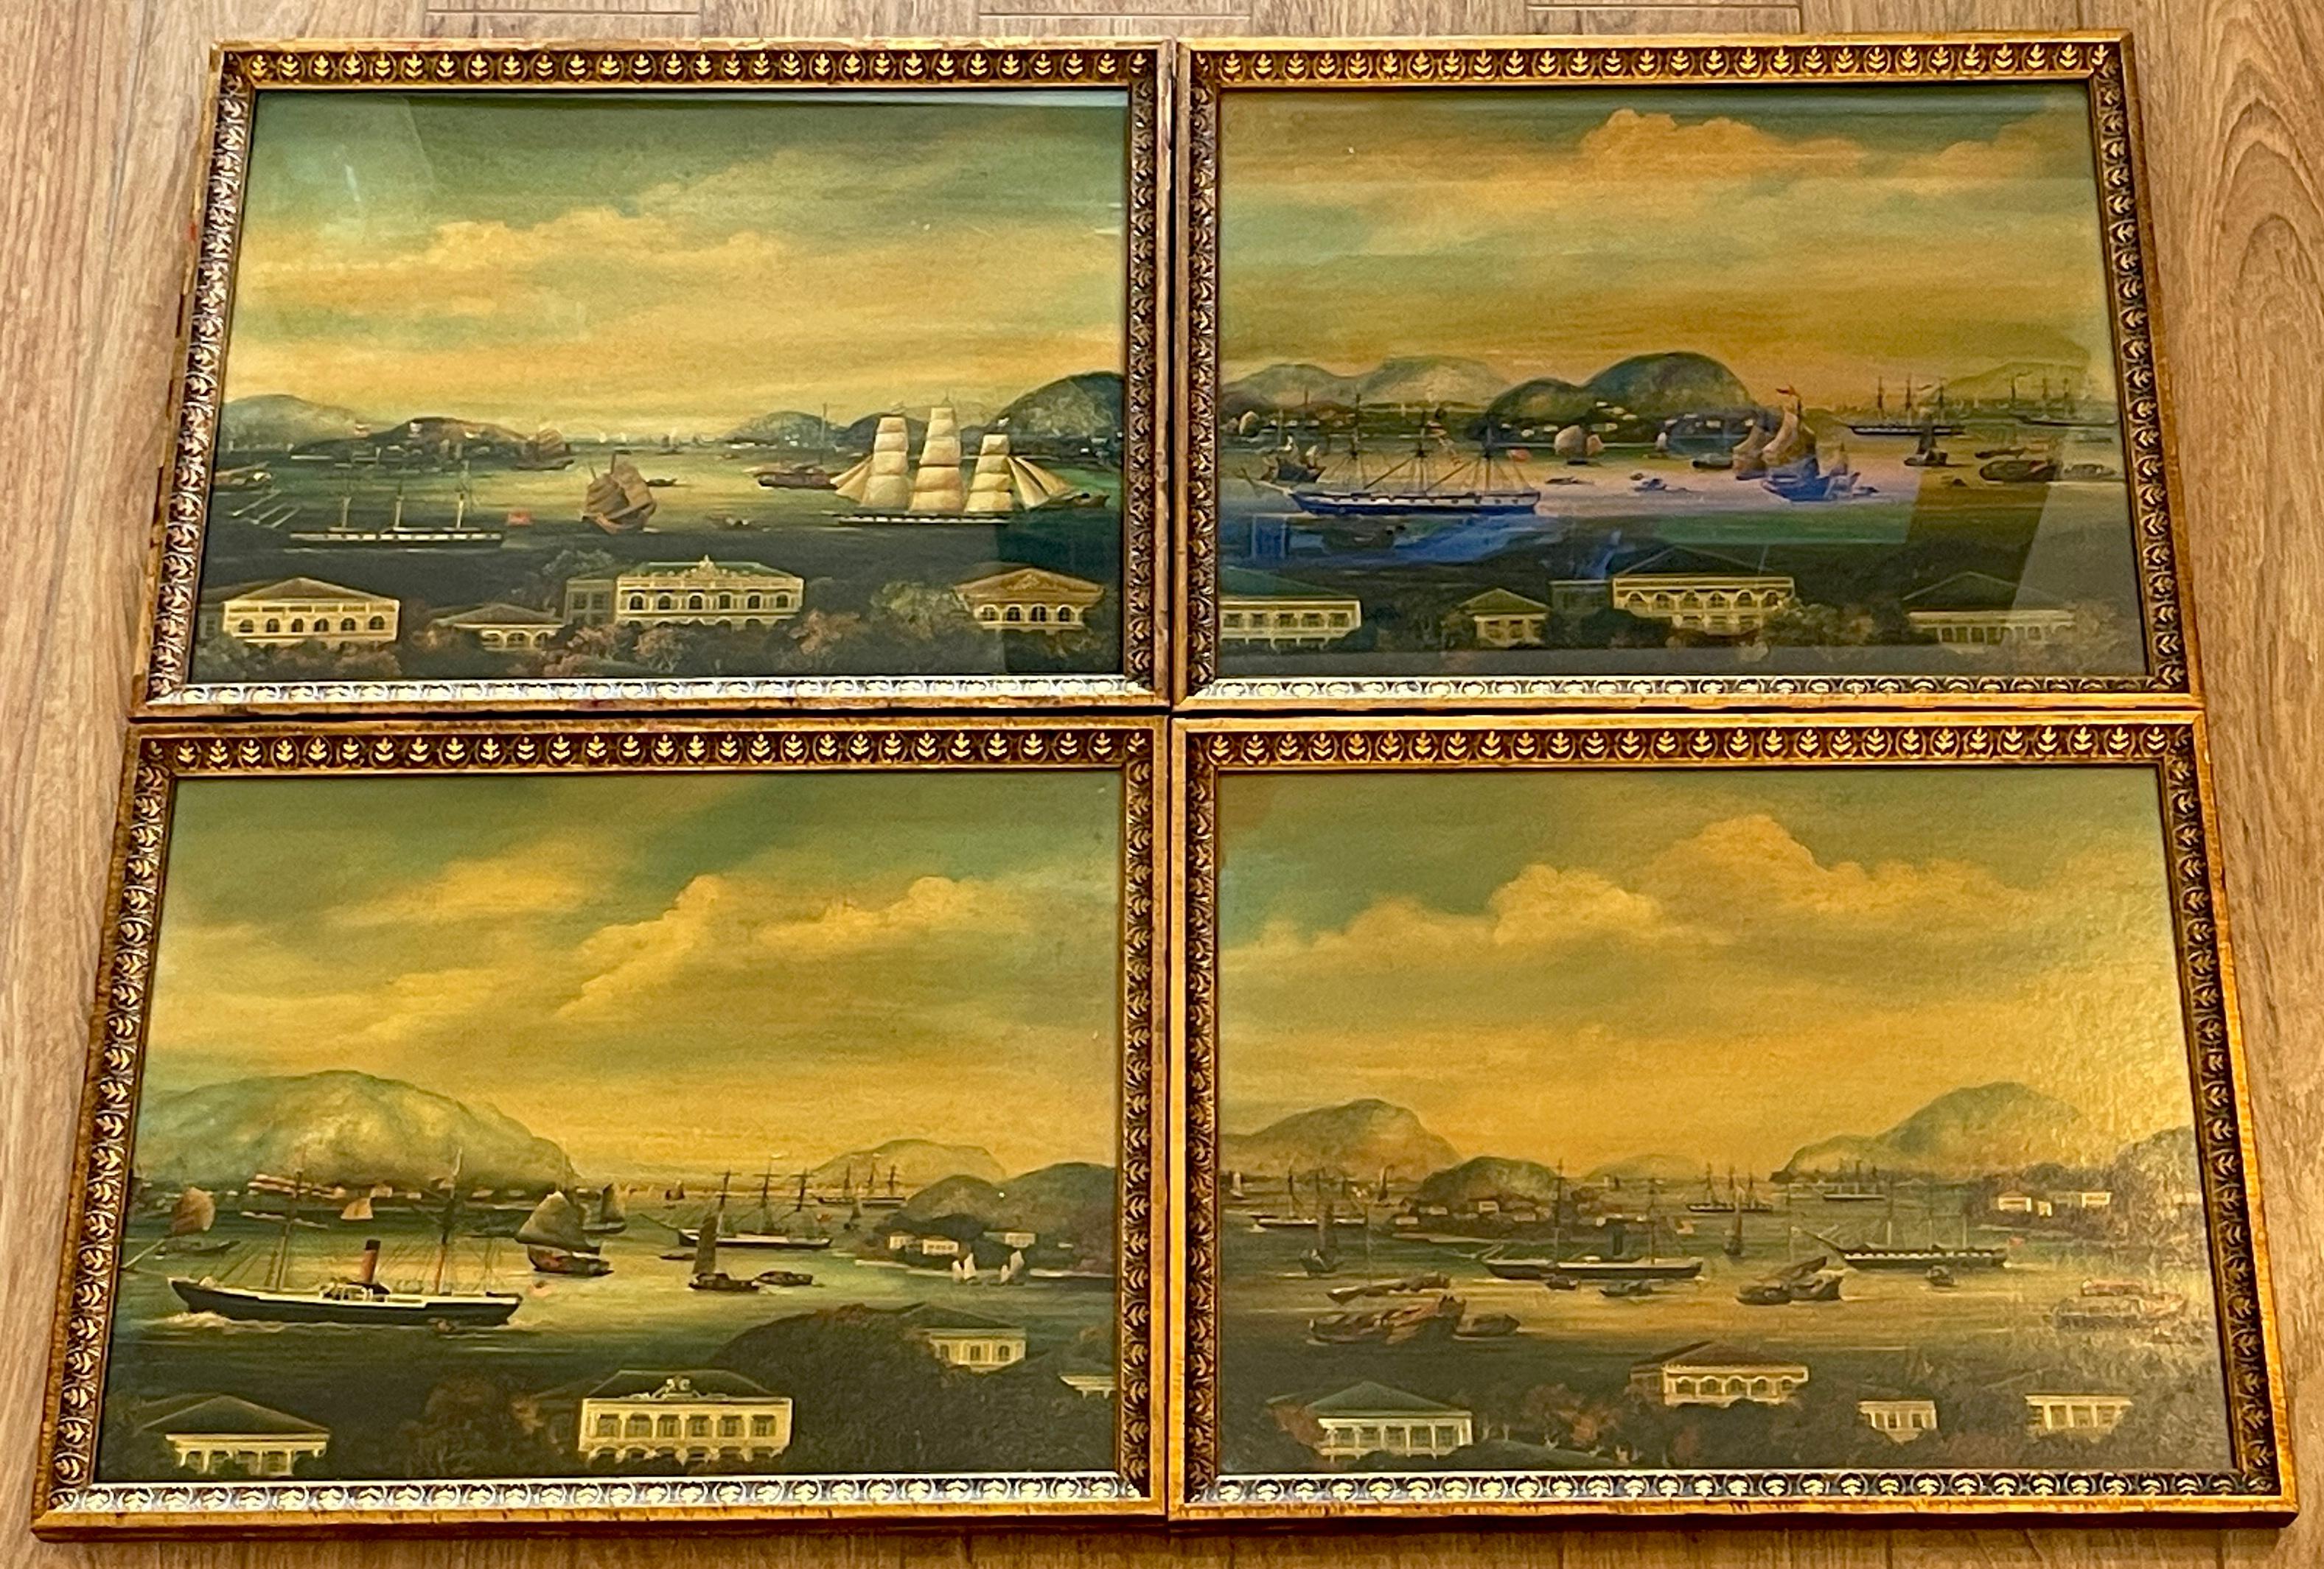 Set of Four 19th-Century Chinese Export Harbor and Seascape Paintings 
Chinese School, Hand Painted on Silk, Measuring 14.5 inches wide by 11 inches high (sight), Laid on Board

Immerse yourself in the enchanting world of 19th-century Chinese